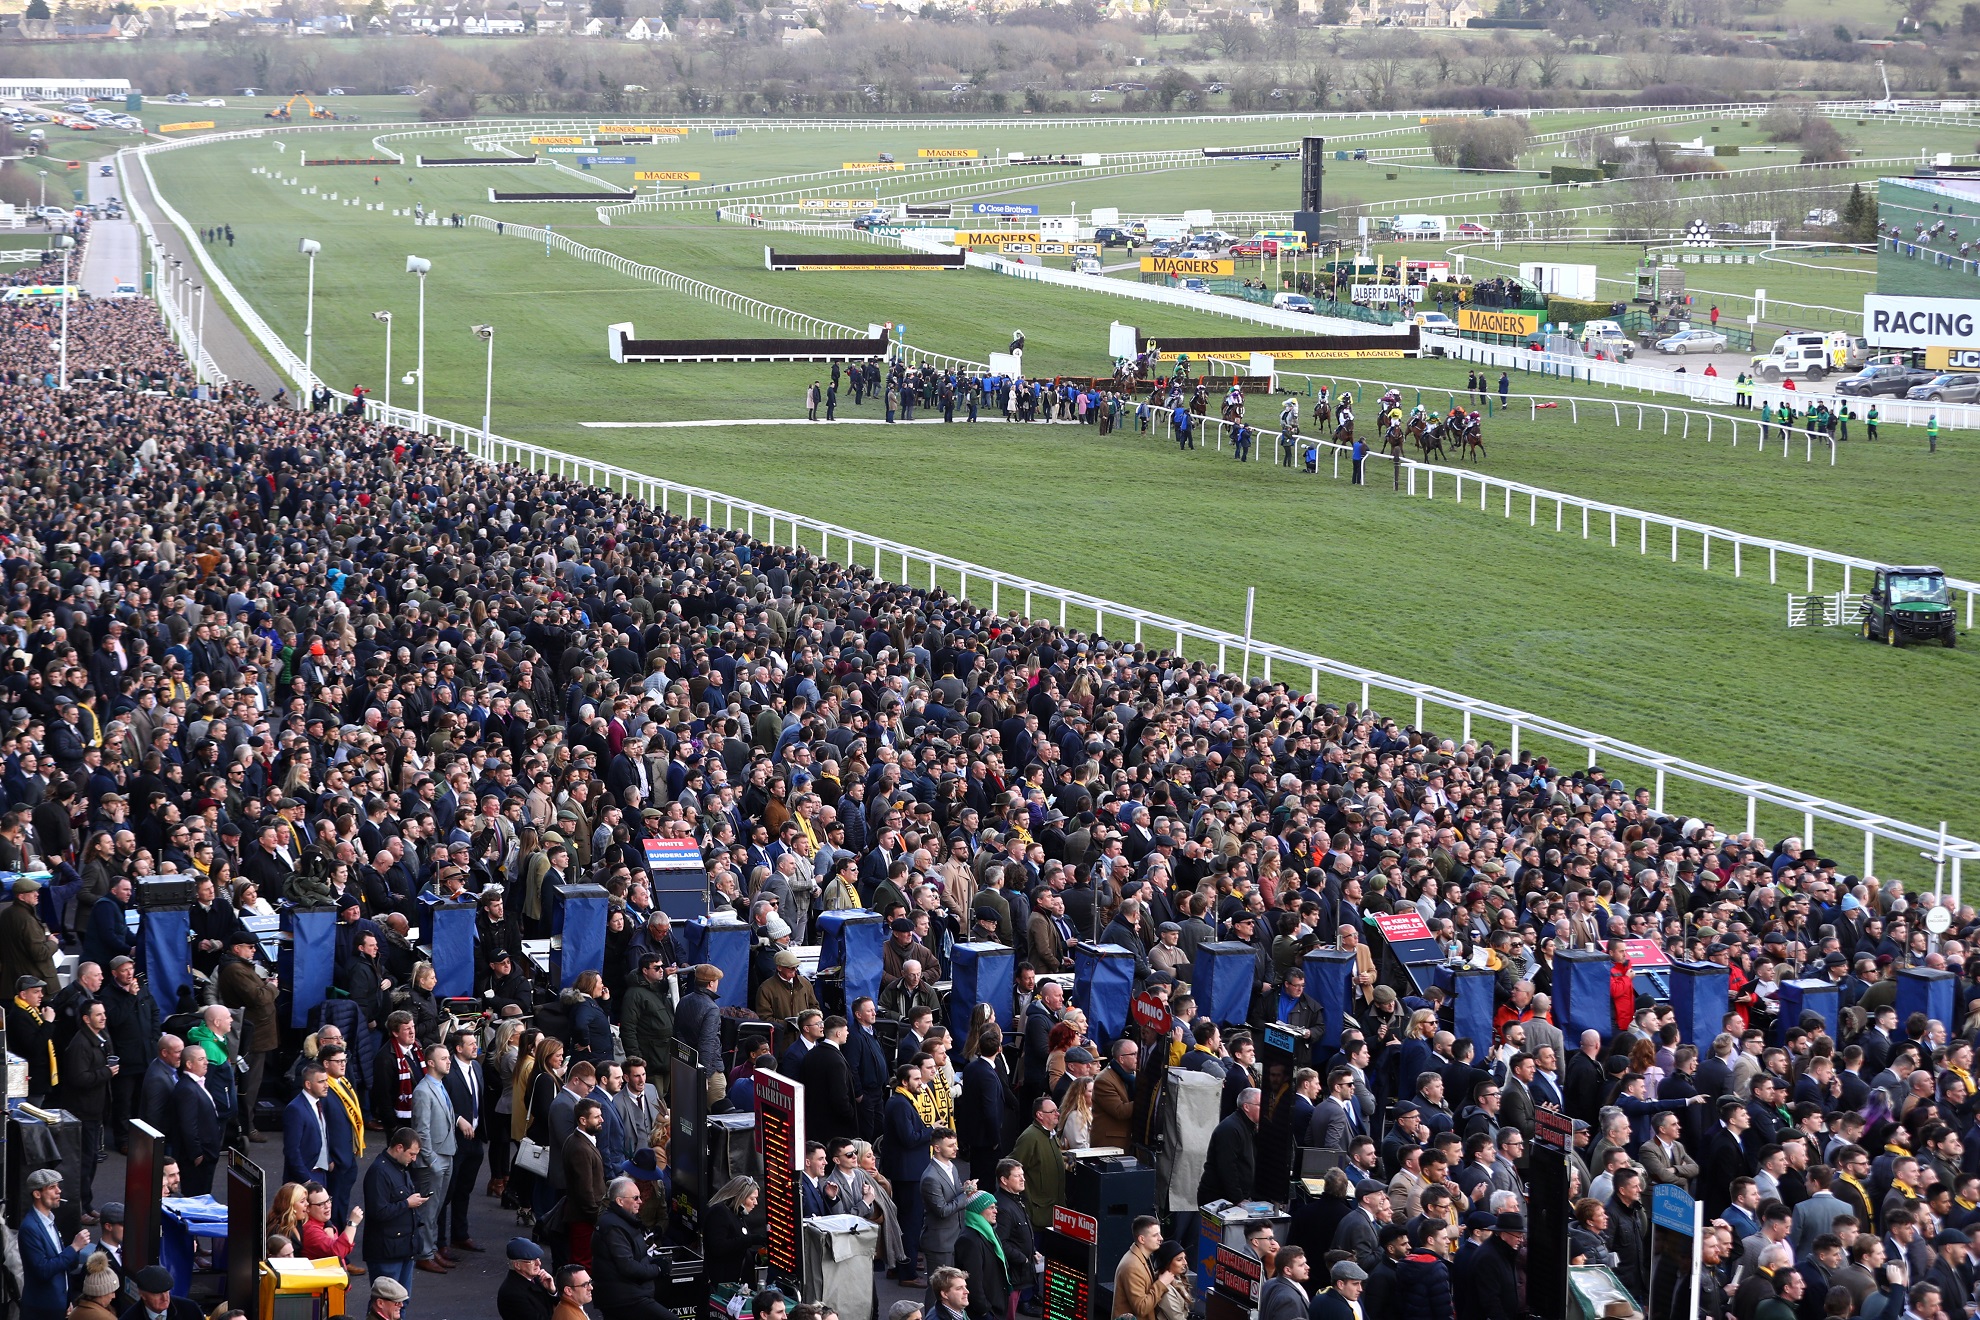 A quarter of a million people attended Cheltenham across four days in mid-March. (Getty Images)